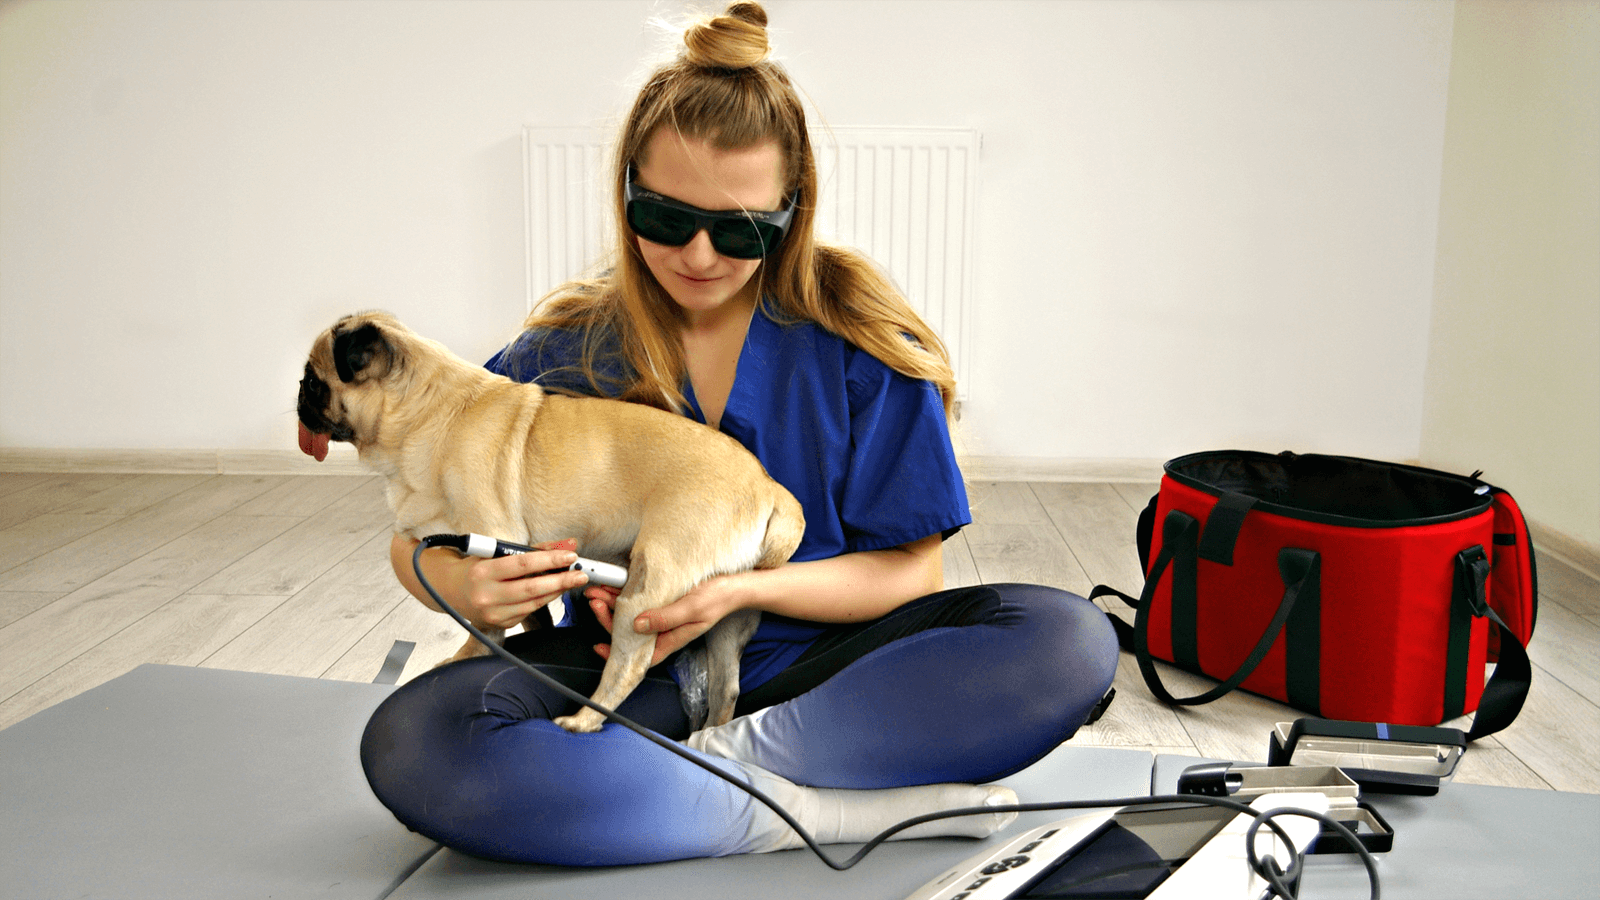 Agata uses laser therapy in the physical rehabilitation process.